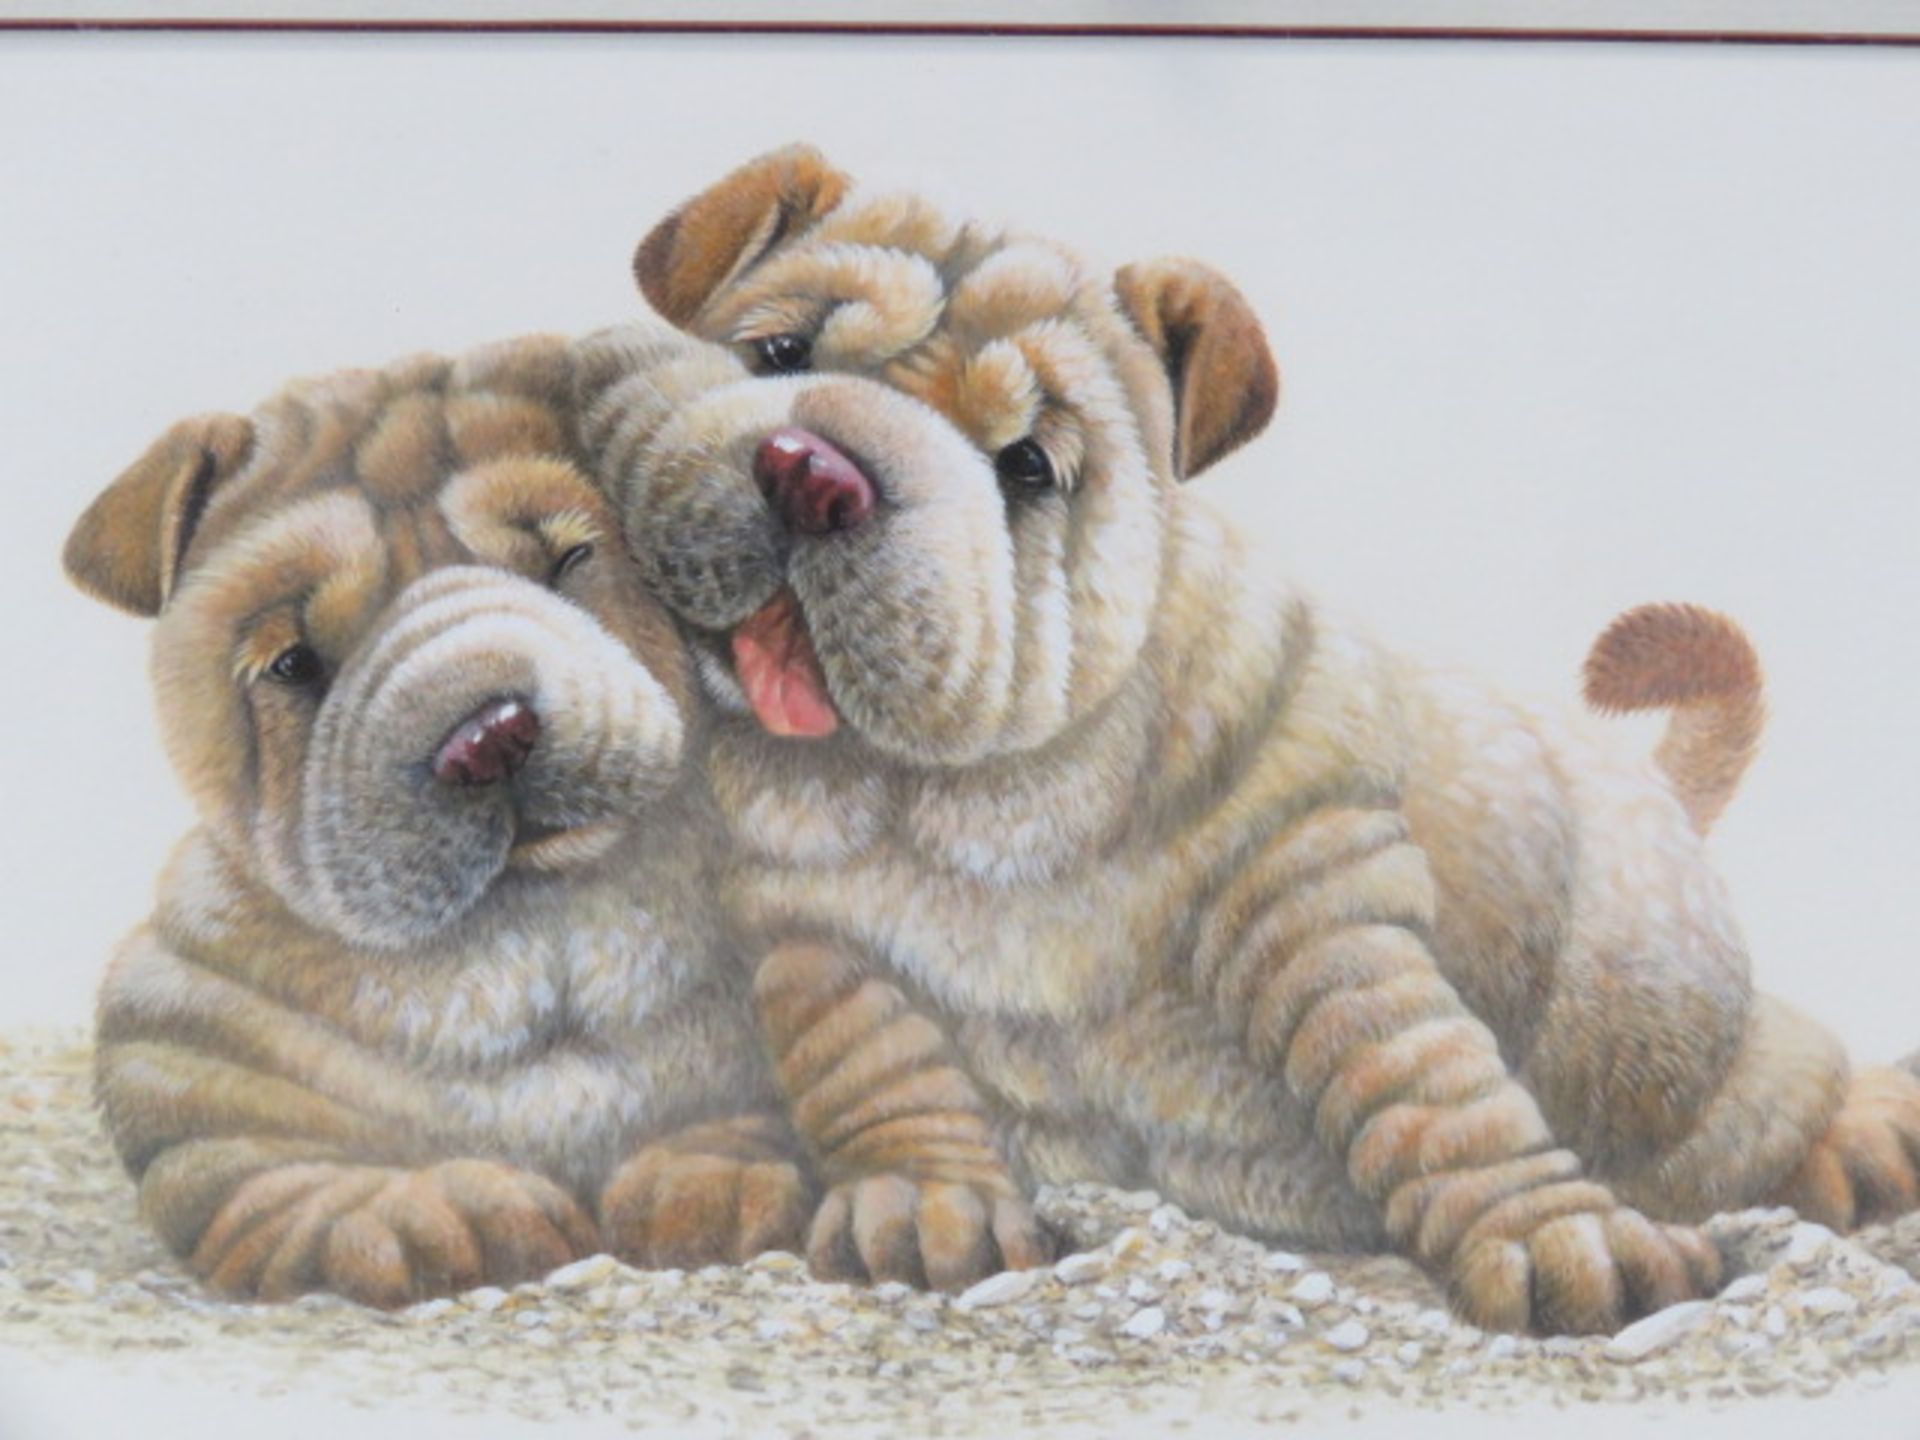 5459 - Framed and glazed print with puppies - Image 2 of 2